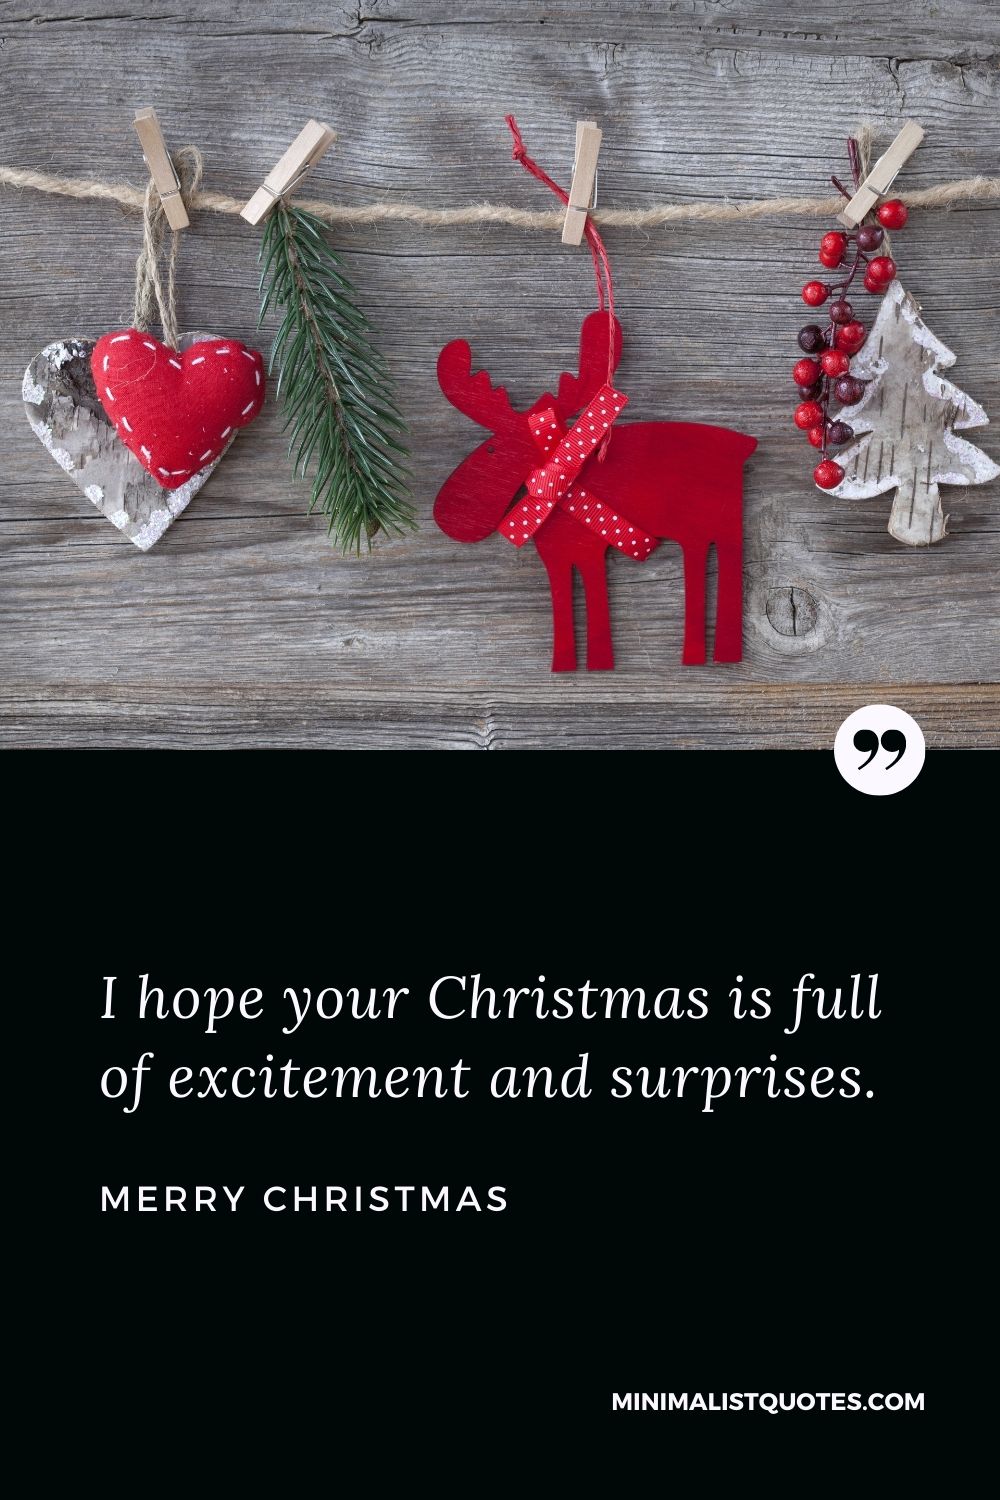 Merry Christmas Wish - I hope your Christmas is full of excitement and surprises.